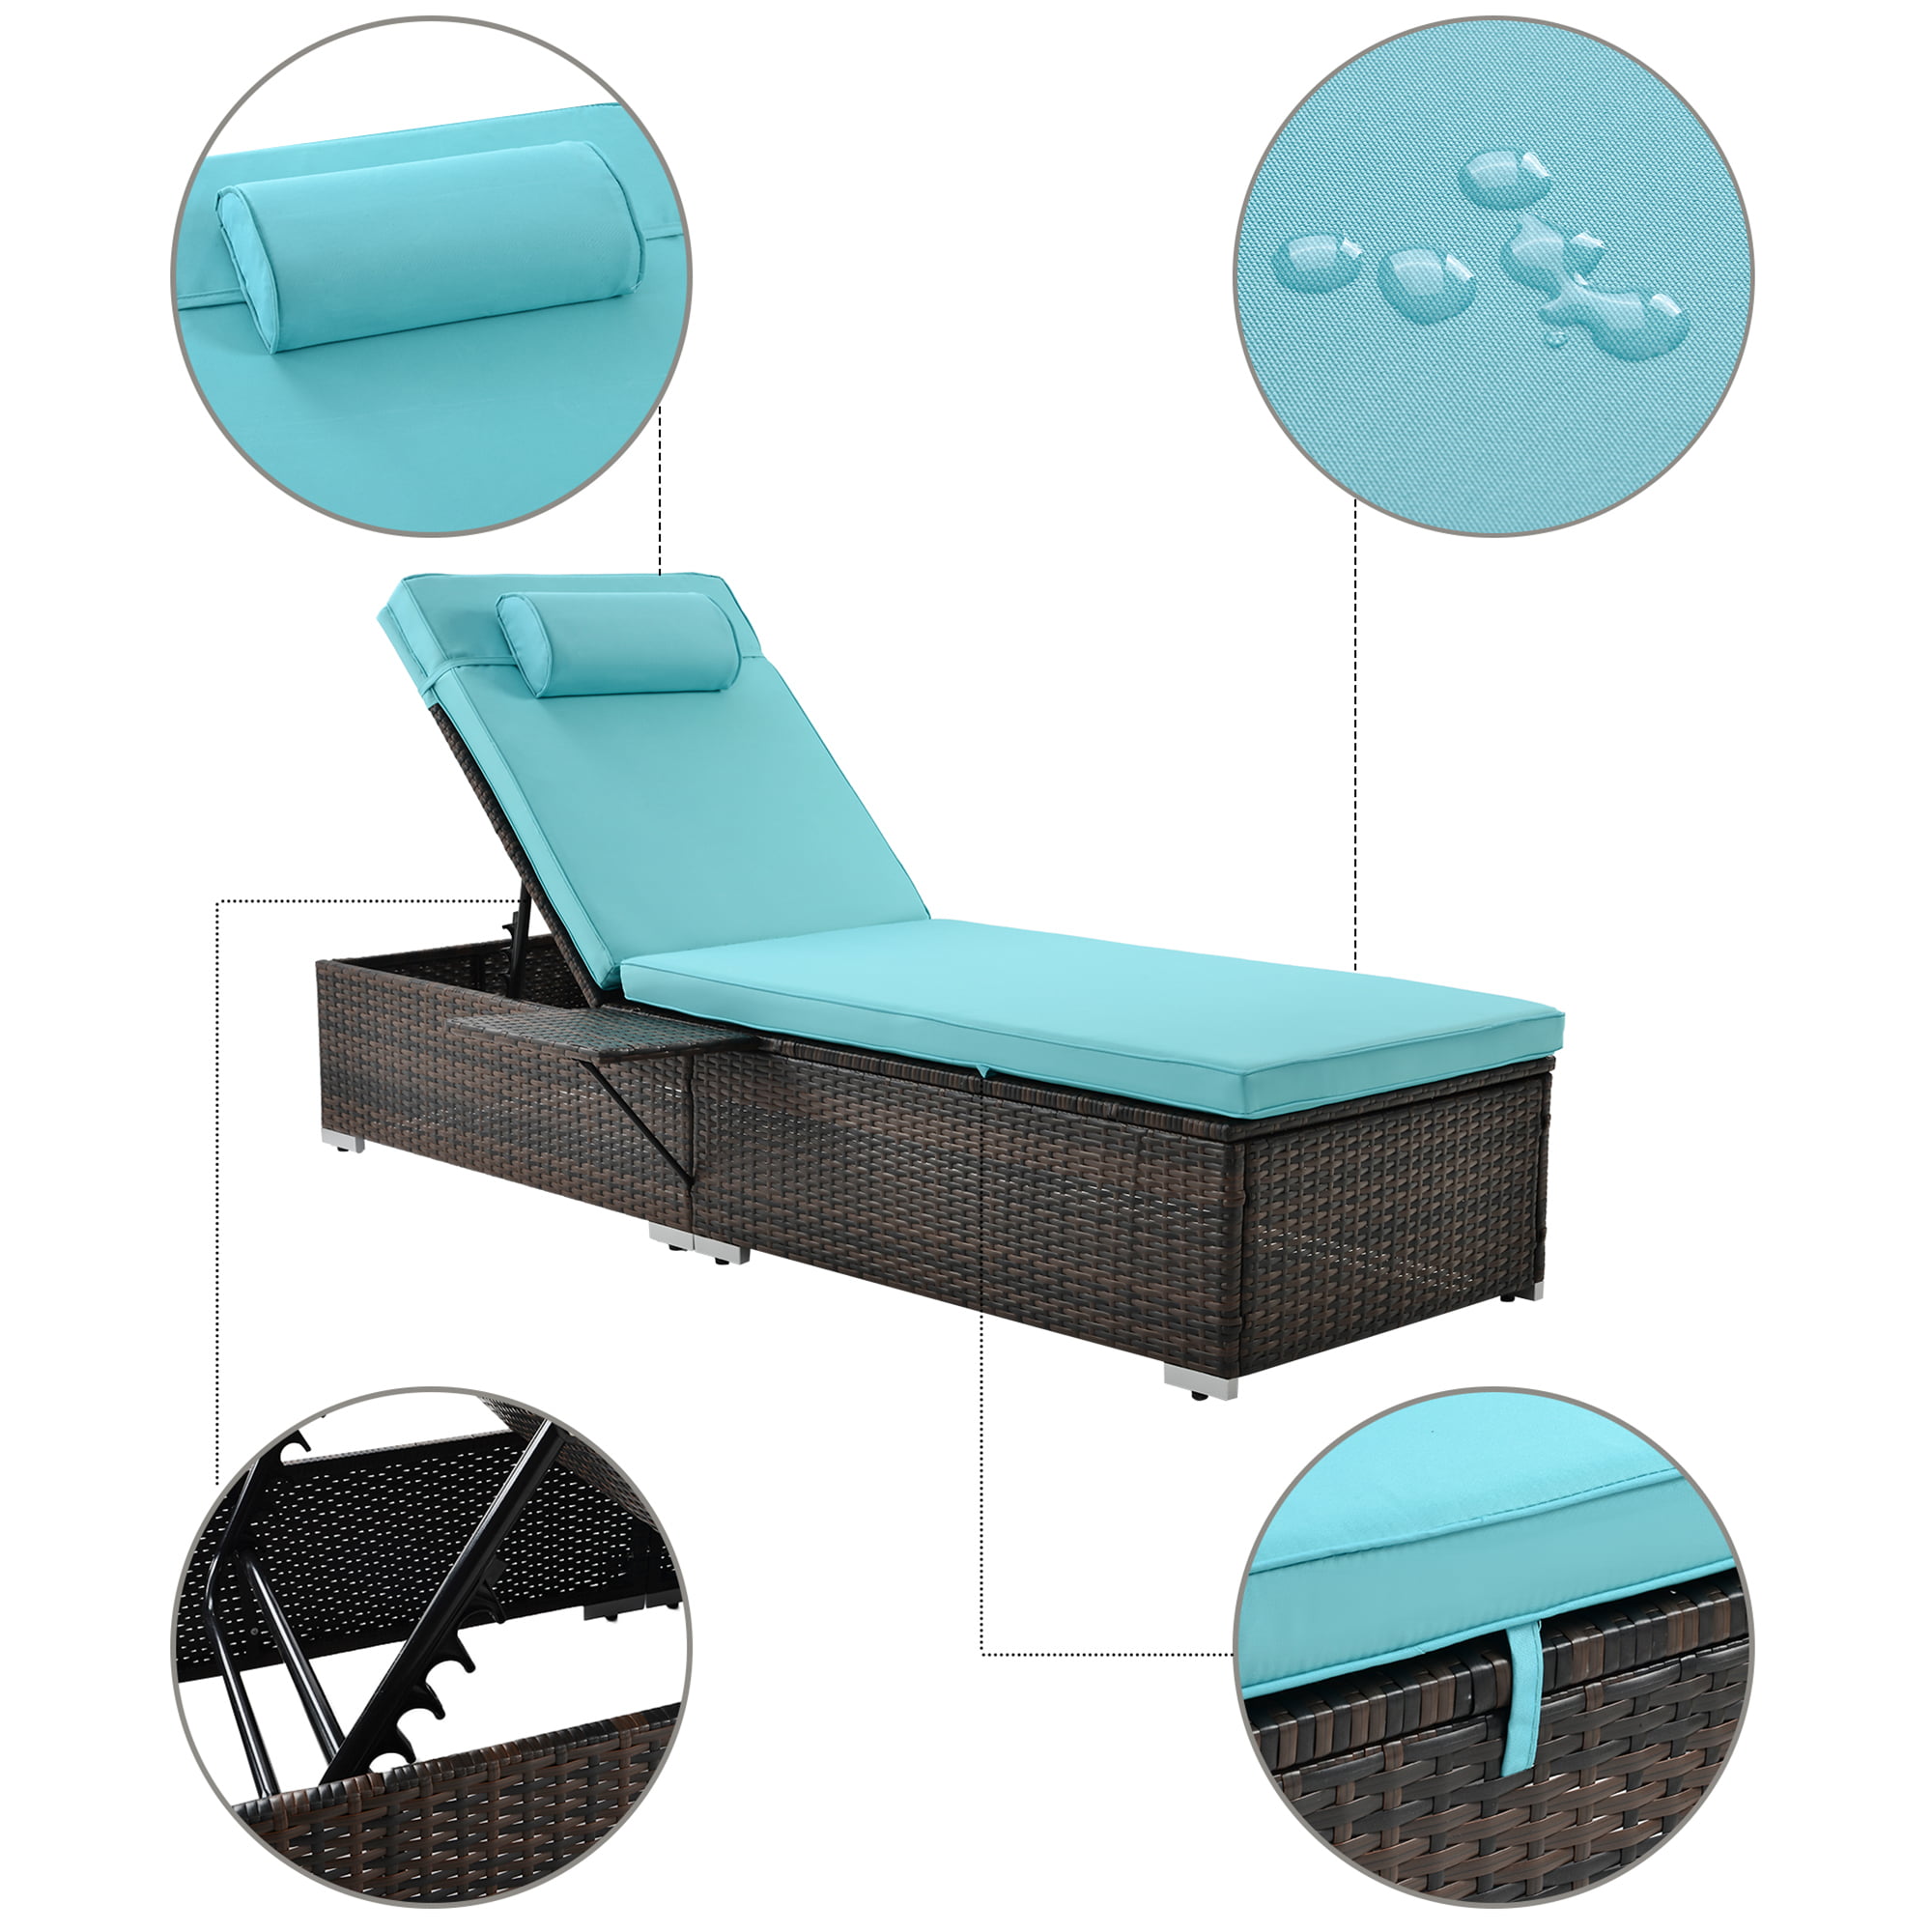 GAOPAN Outdoor PE Chaise Lounge-2 Piece Patio Rattan Chair Furniture Set Beach Pool Adjustable Backrest Recliners with Small Wicker Side Table and Comfort Head Pillow Blue+Brown 